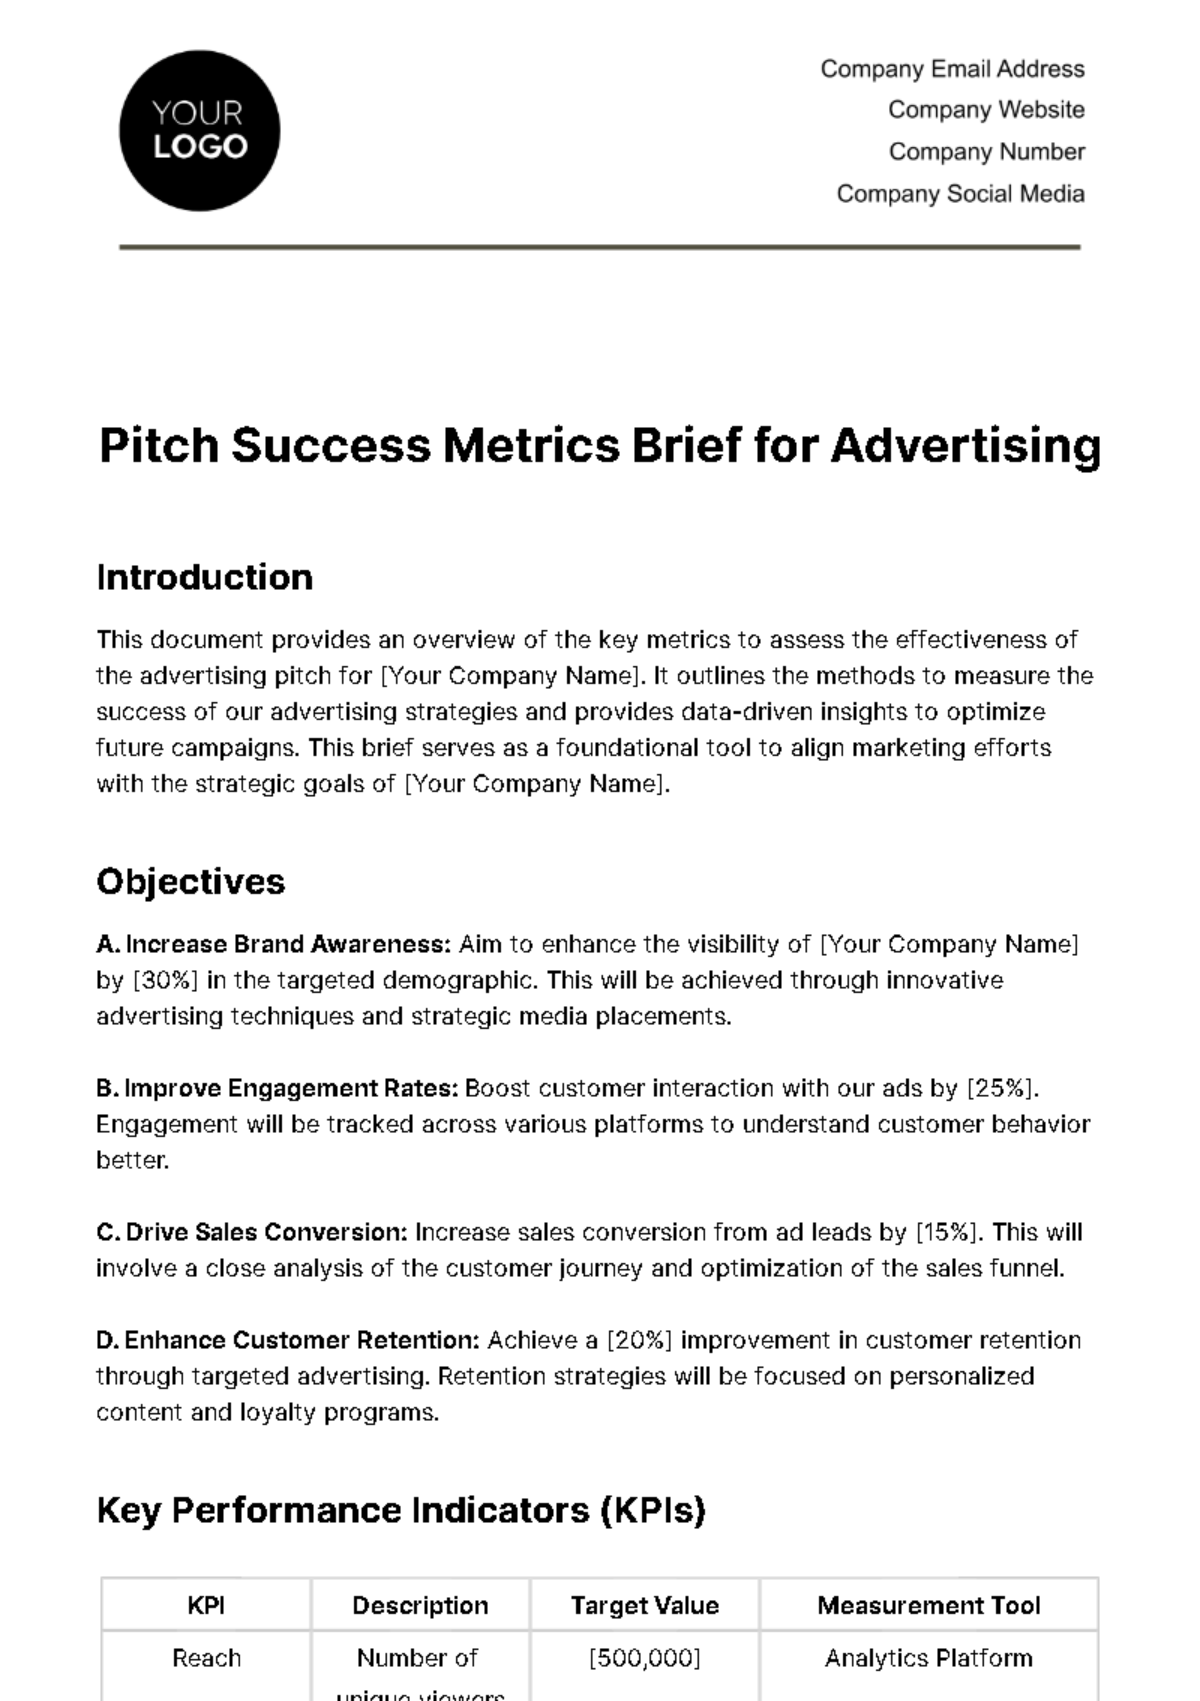 Free Pitch Success Metrics Brief for Advertising Template